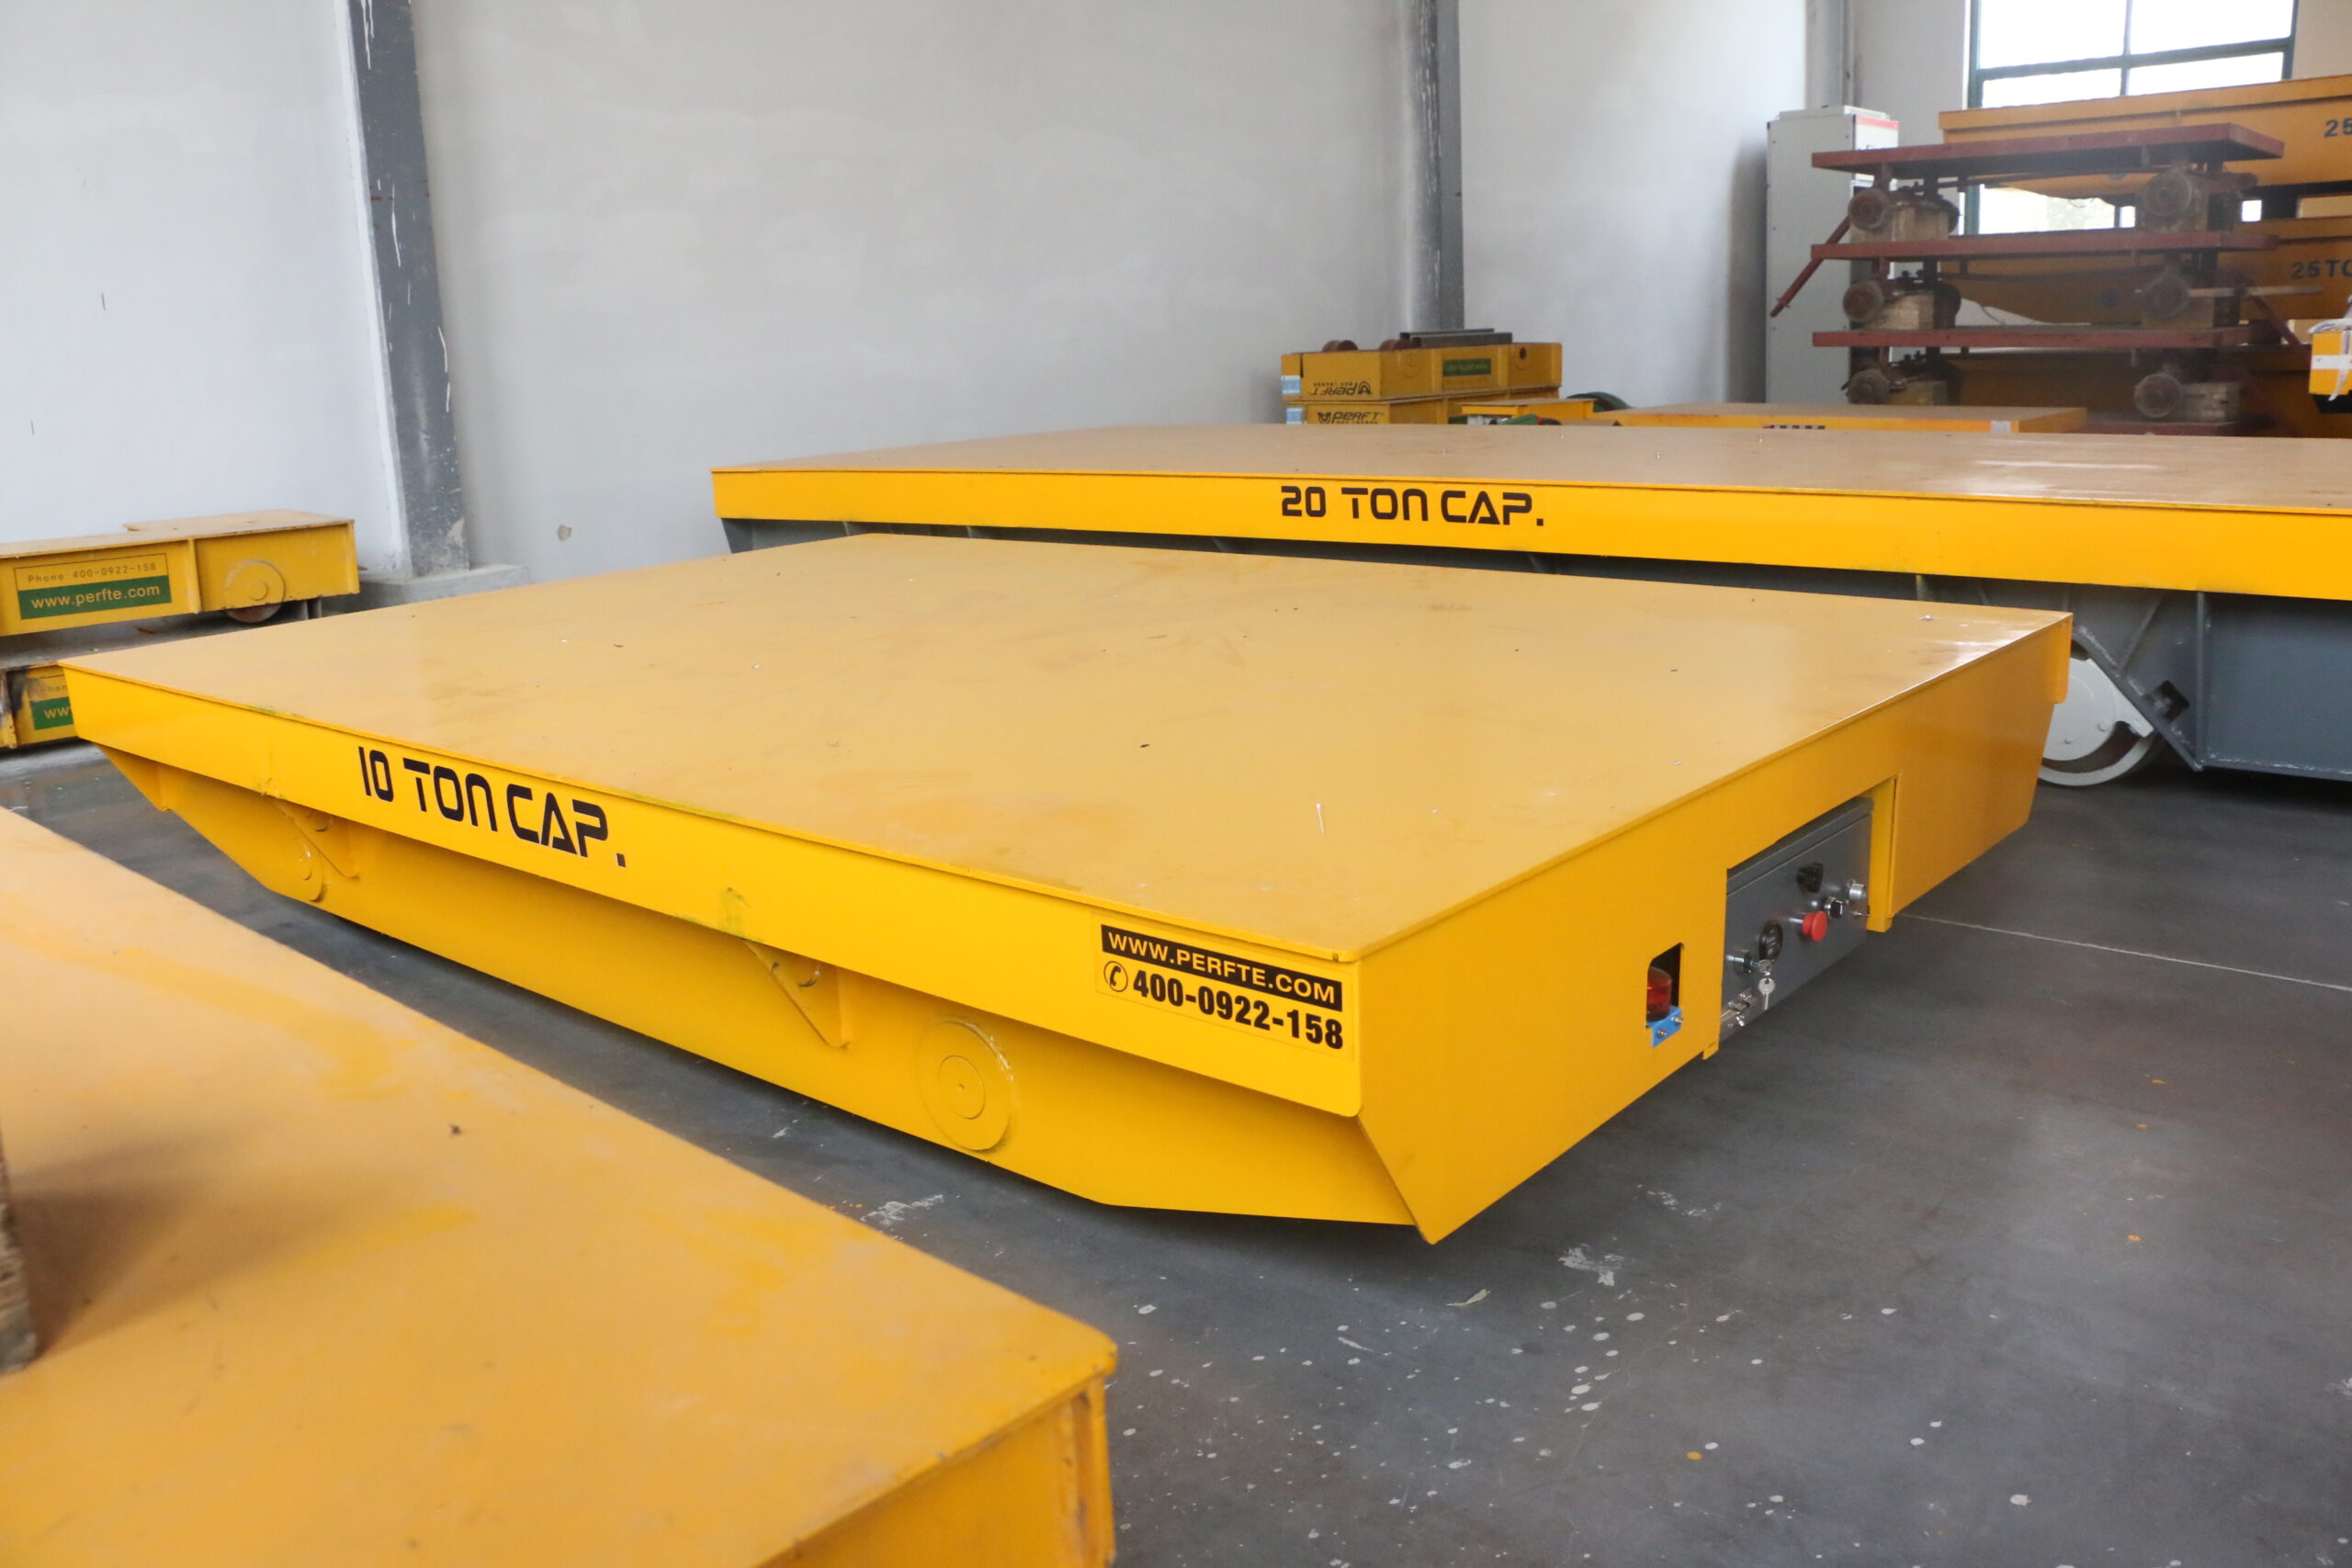 20ml headspace vialCarrying a weight of 10 tons rail transfer cart